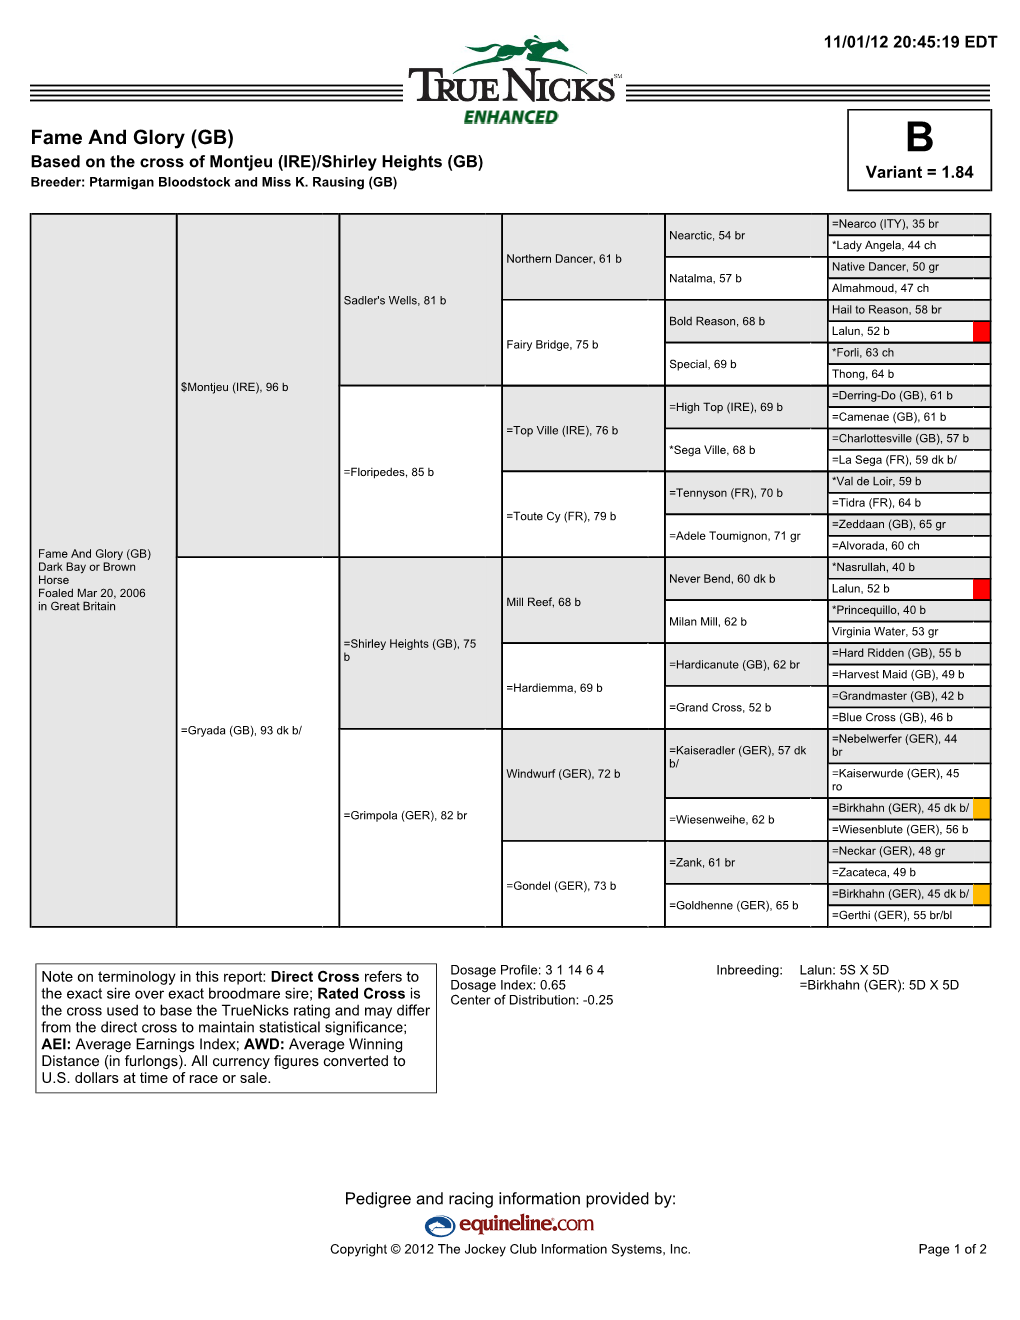 Fame and Glory (GB) B Based on the Cross of Montjeu (IRE)/Shirley Heights (GB) Variant = 1.84 Breeder: Ptarmigan Bloodstock and Miss K